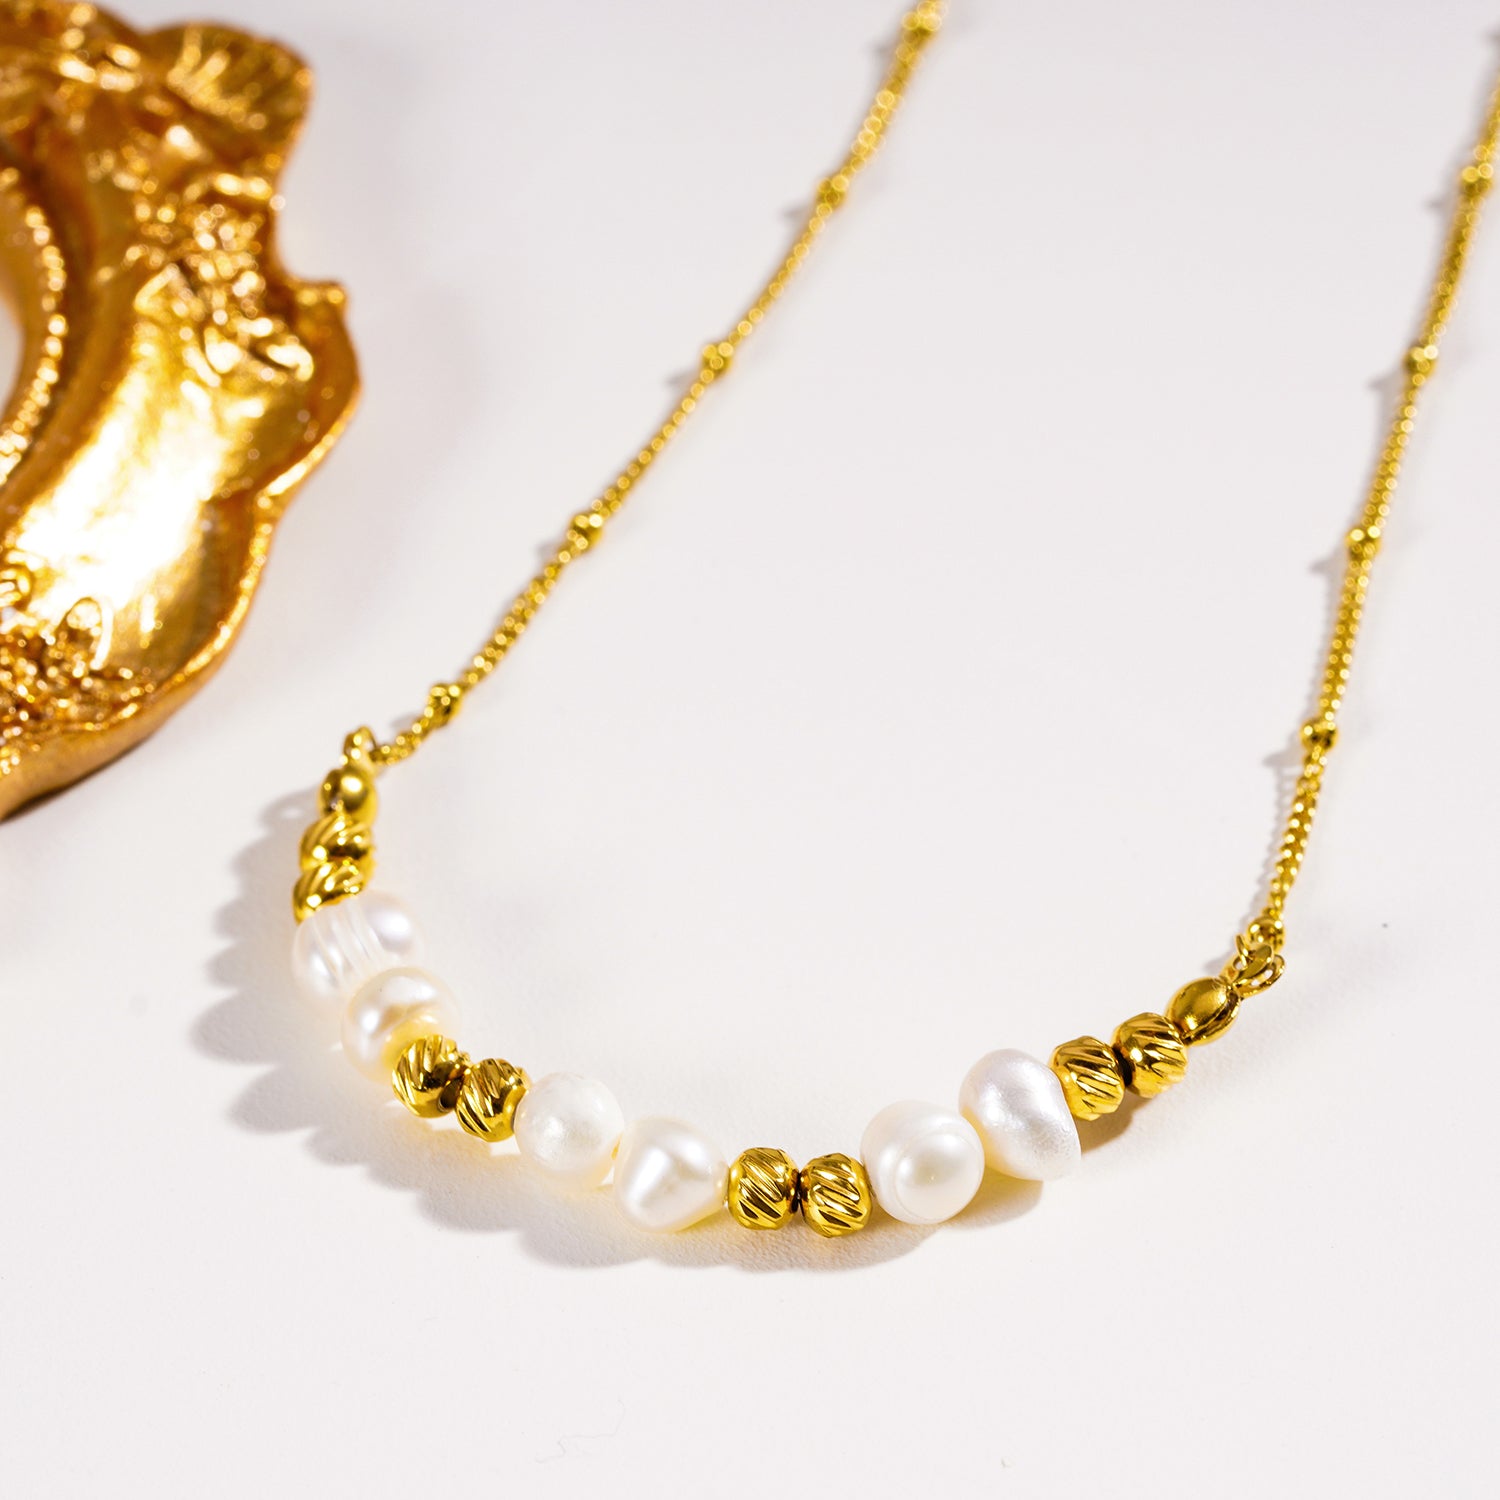 Style VILJA 3223: Gilded Harmony Chain Necklace with Gold Beads and Freshwater Pearls.